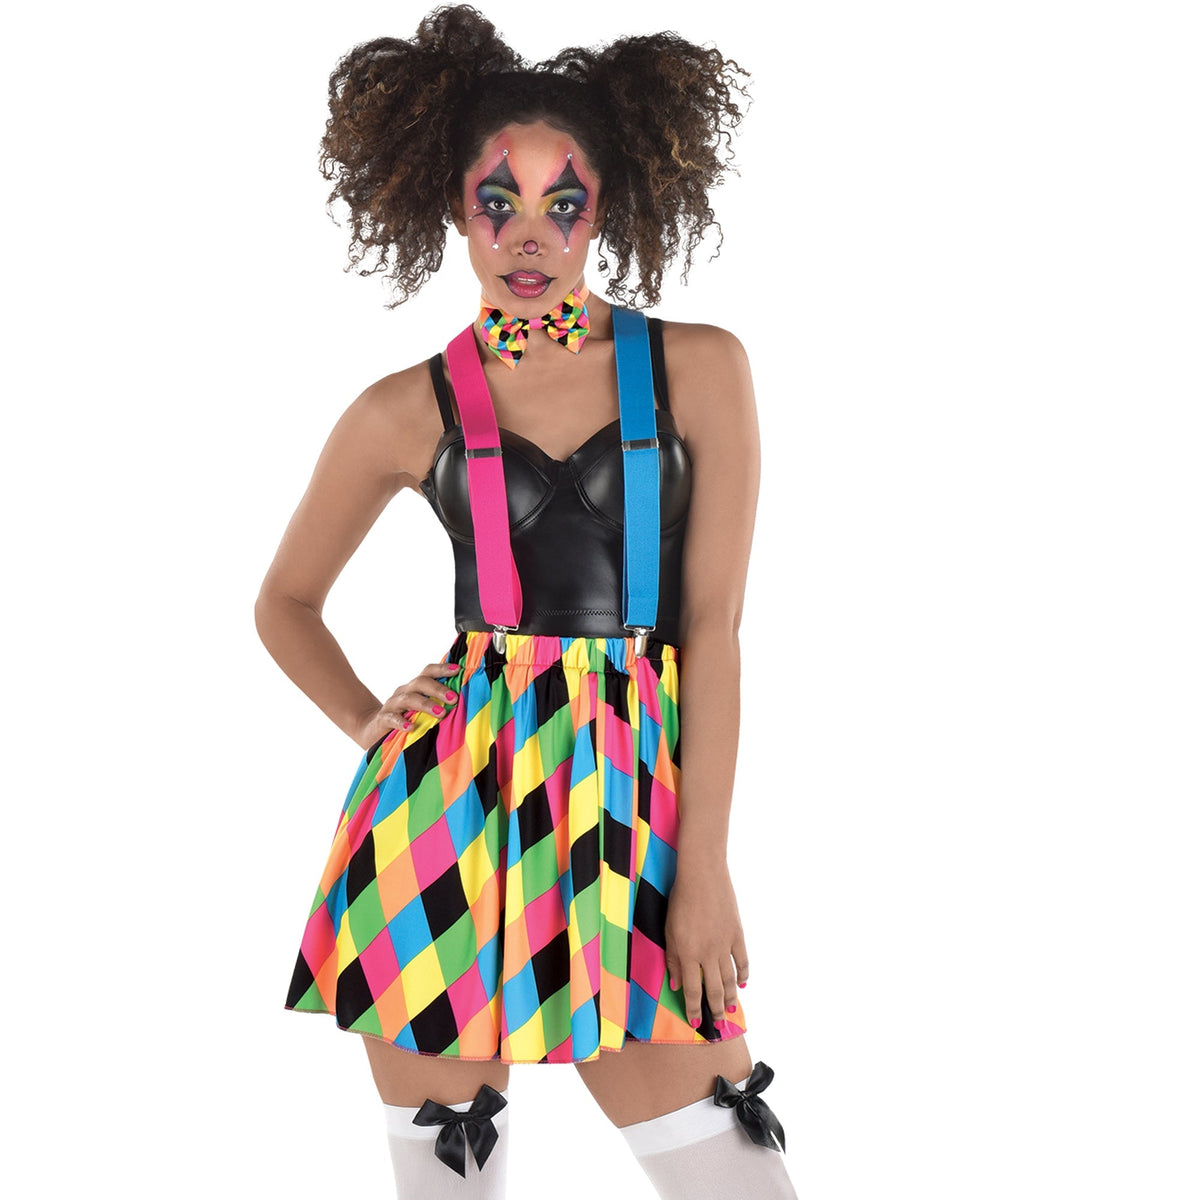 SUIT YOURSELF COSTUME CO. Costume Accessories Circus Skater Skirt with Suspender Set for Adults 192937342022